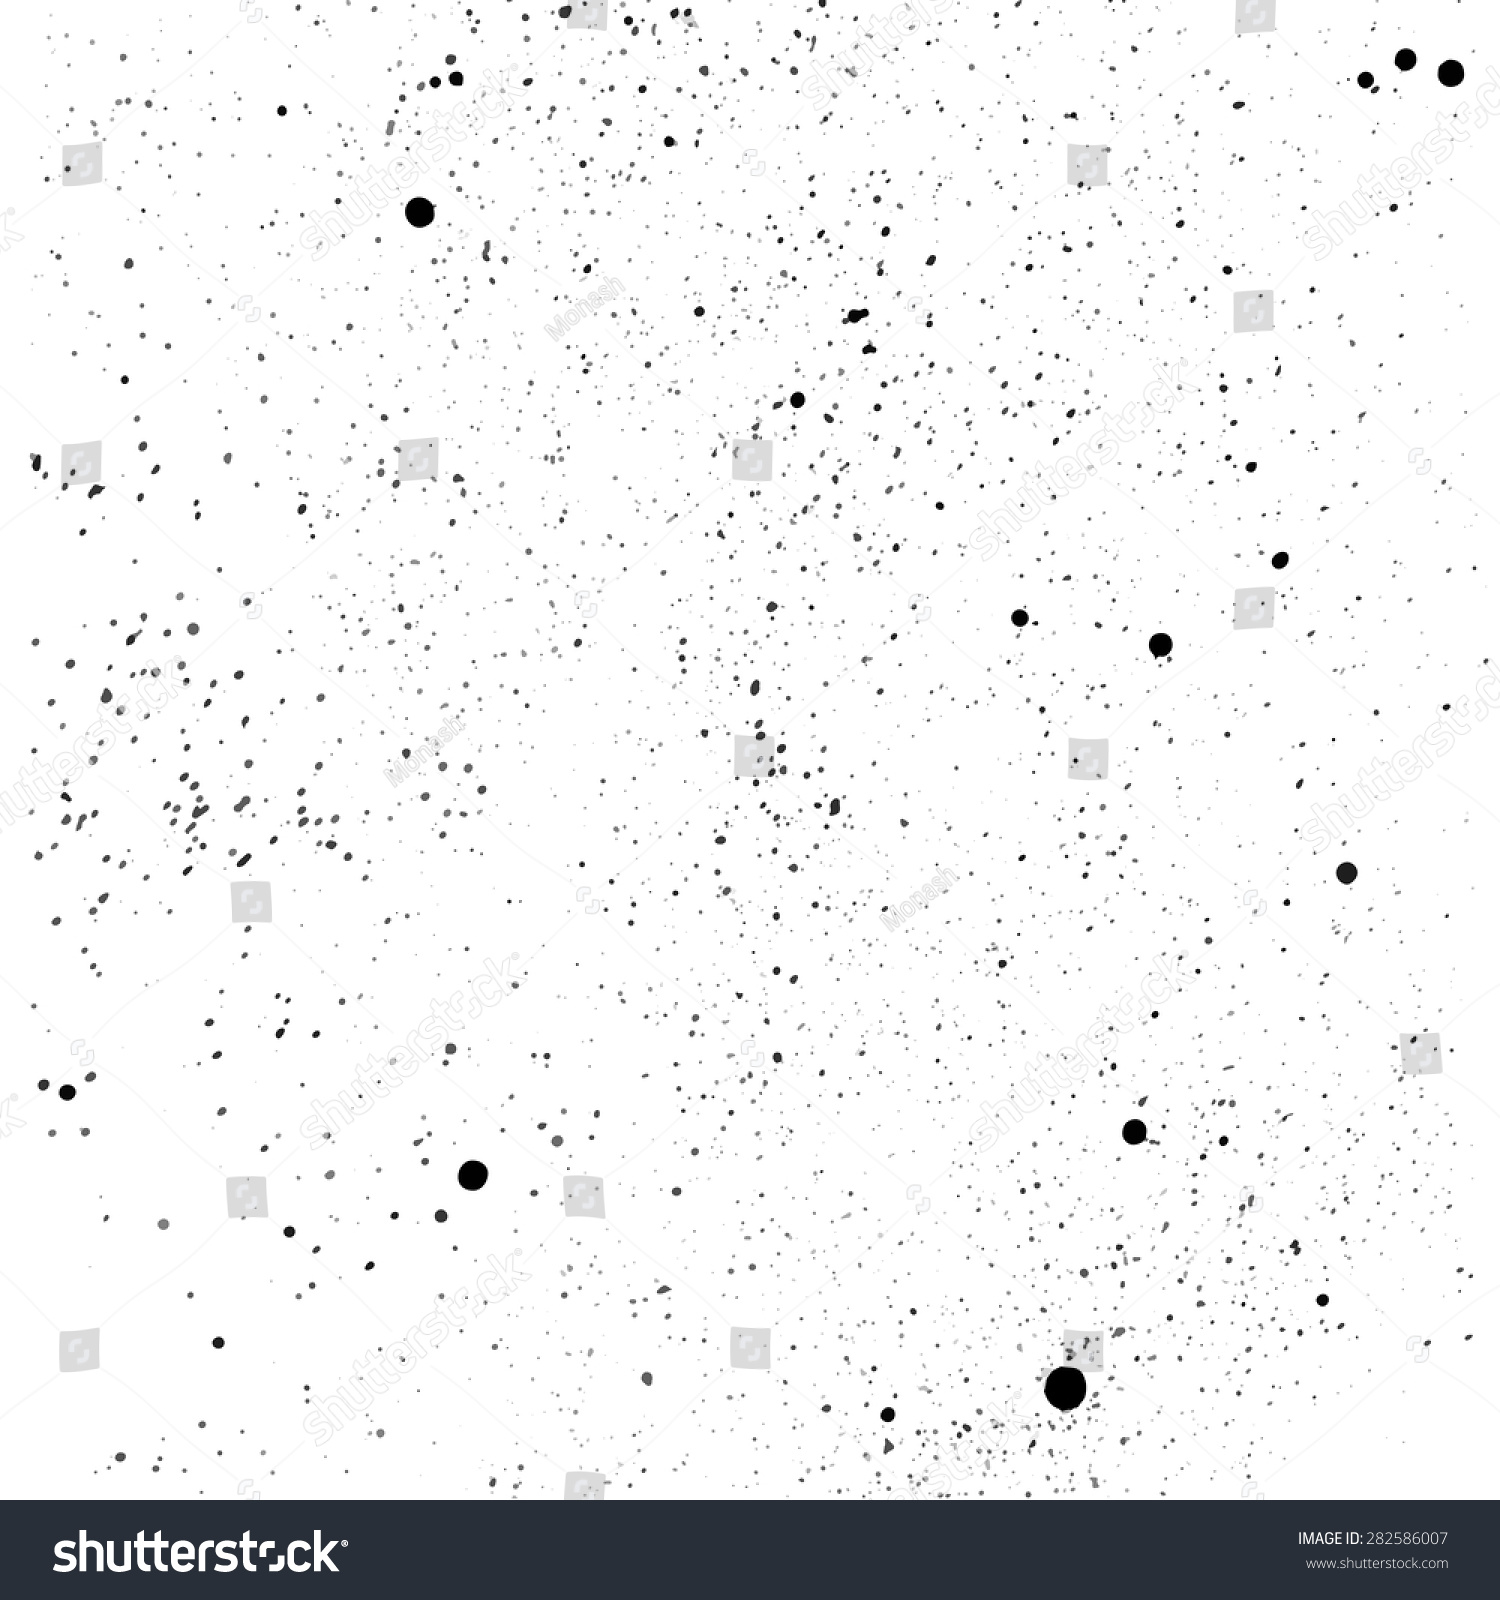 Vector Illustration With Splashes Of Paint. Black And White Background ...